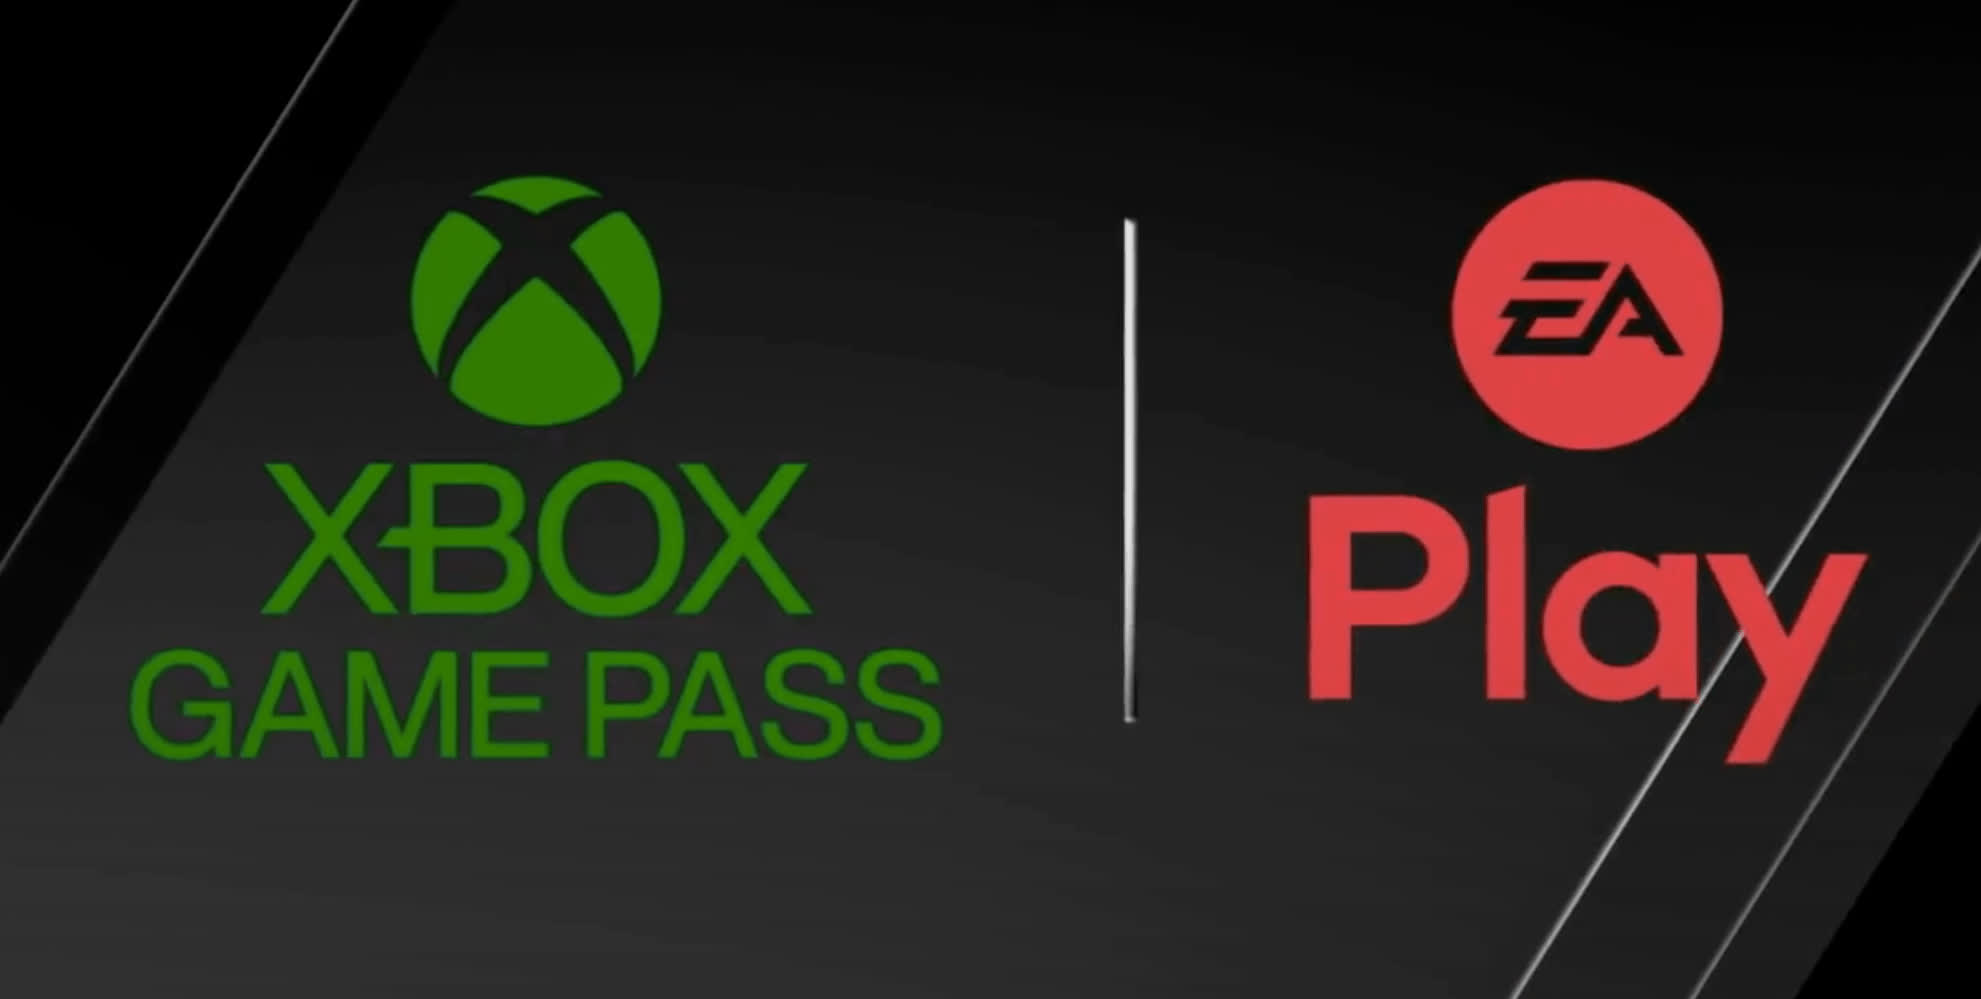 Microsoft partners with EA to add EA Play to Xbox Game Pass